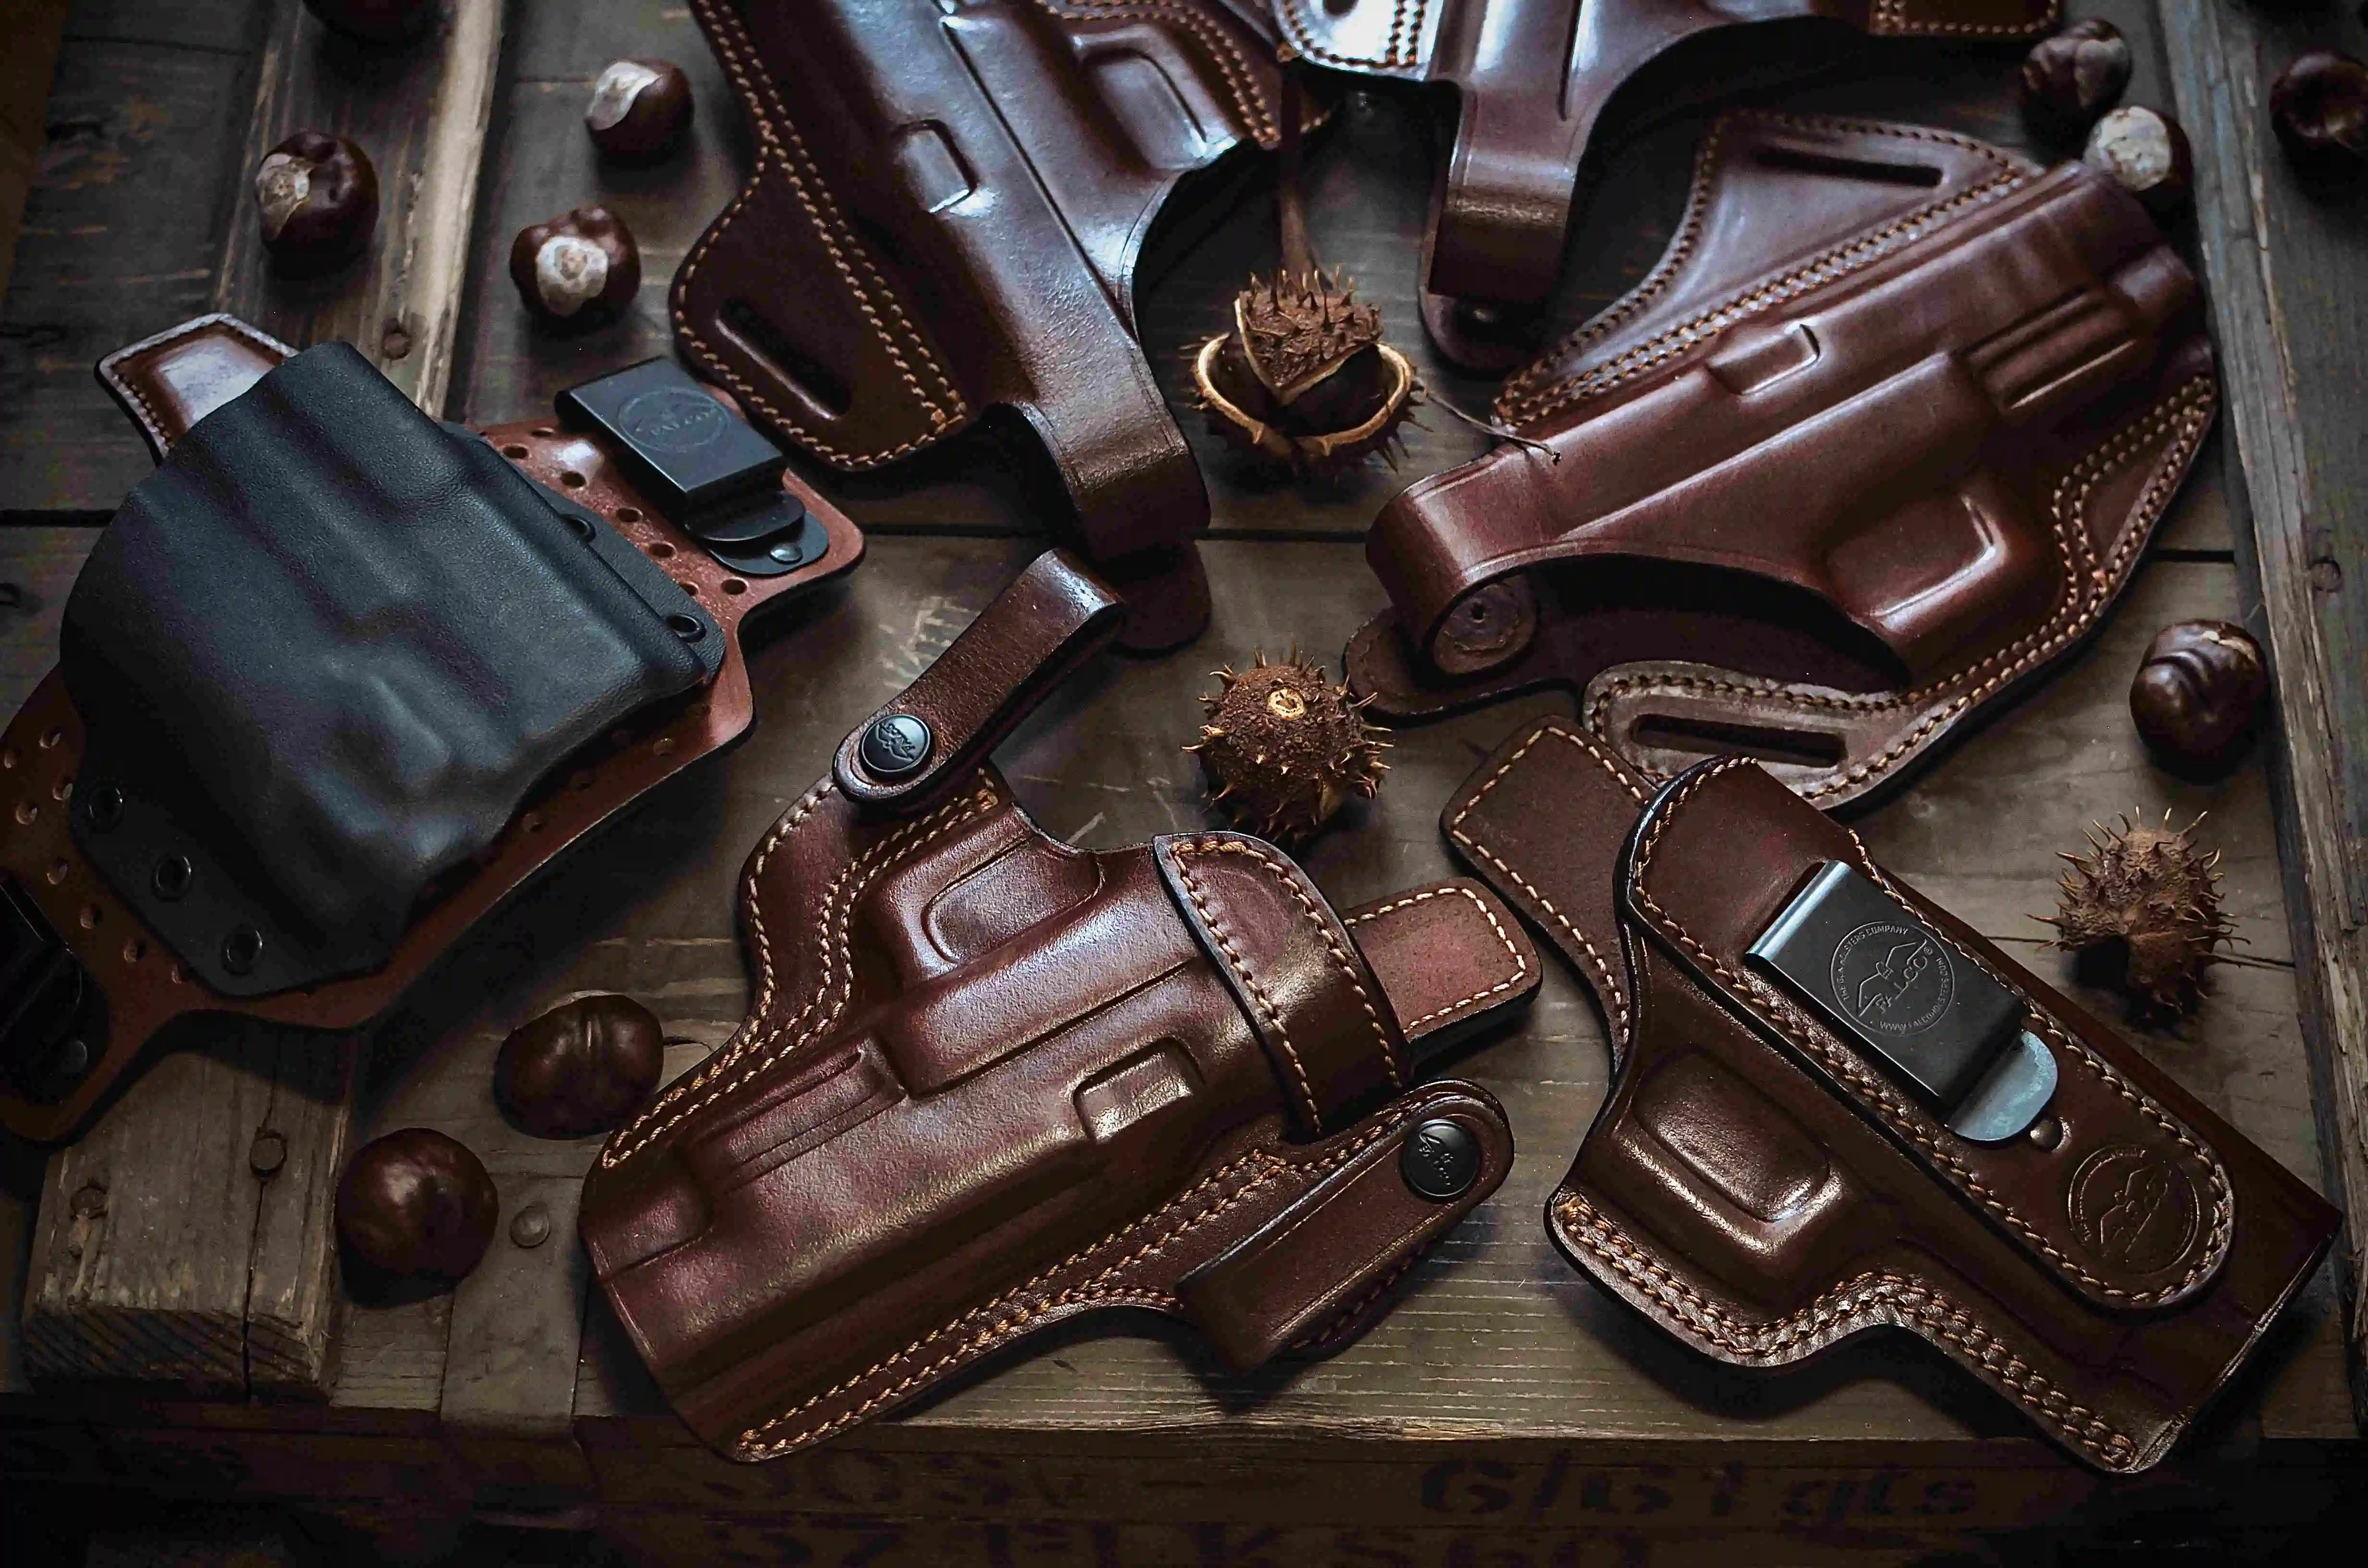 Mix of holsters for various carry styles